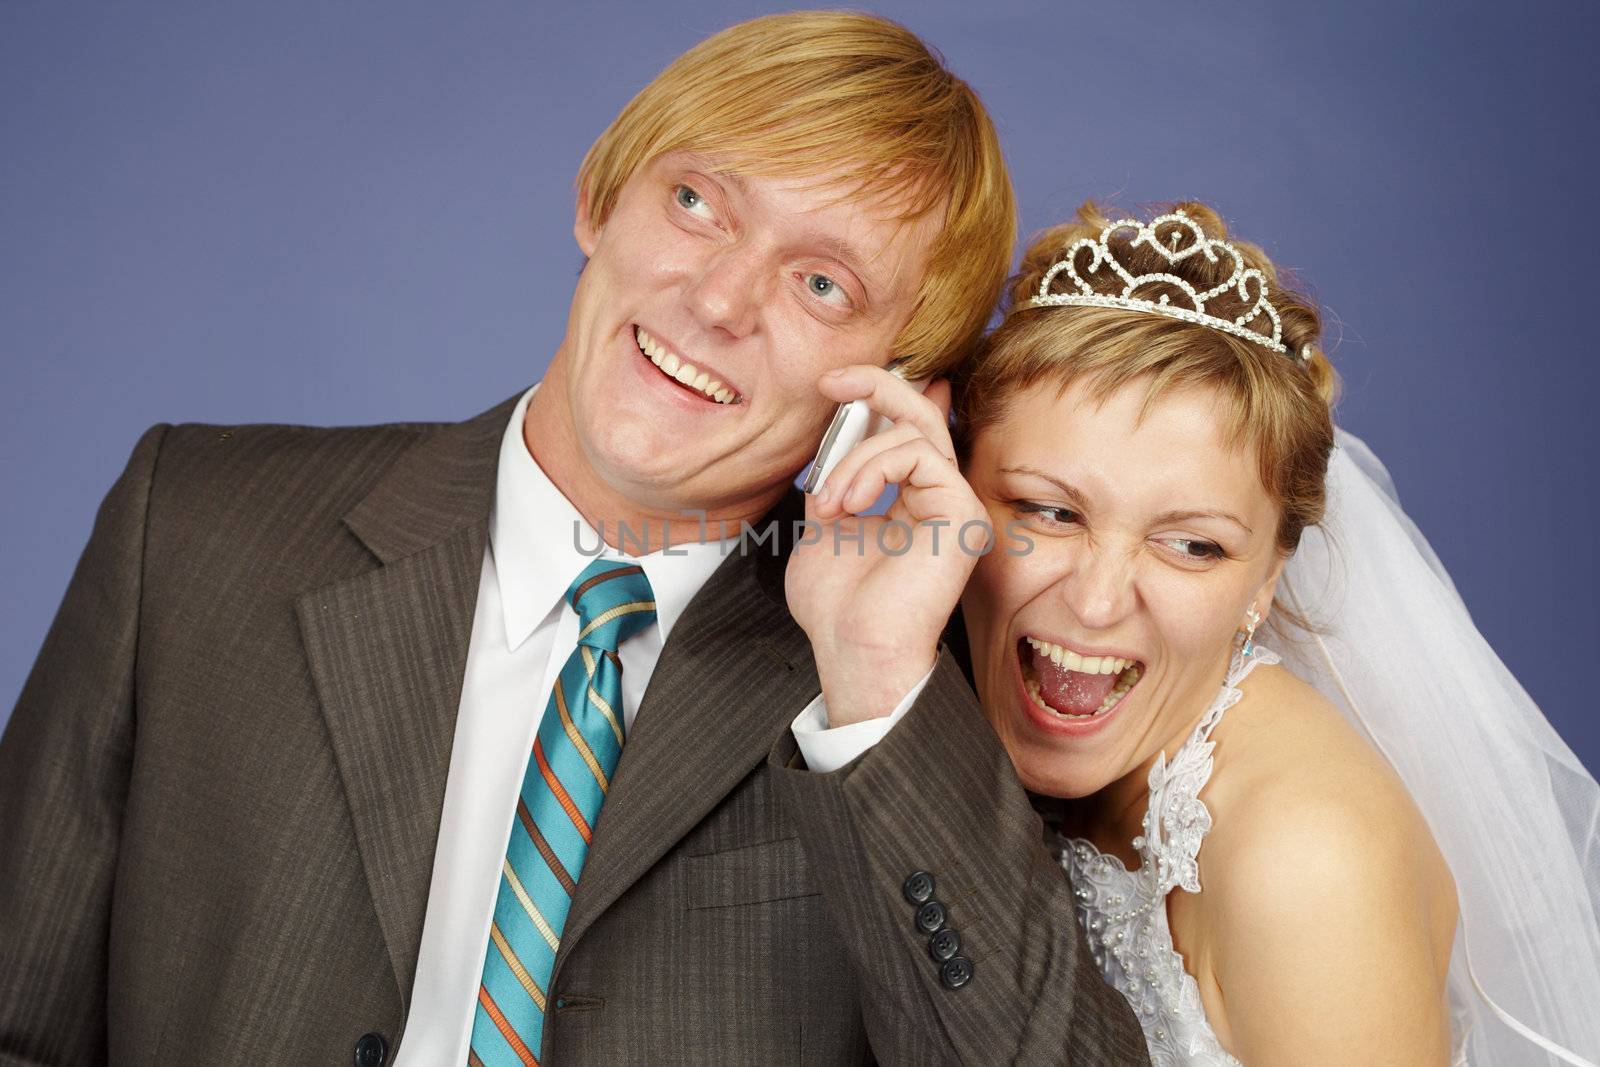 Happy bride and groom is congratulated by phone on blue background